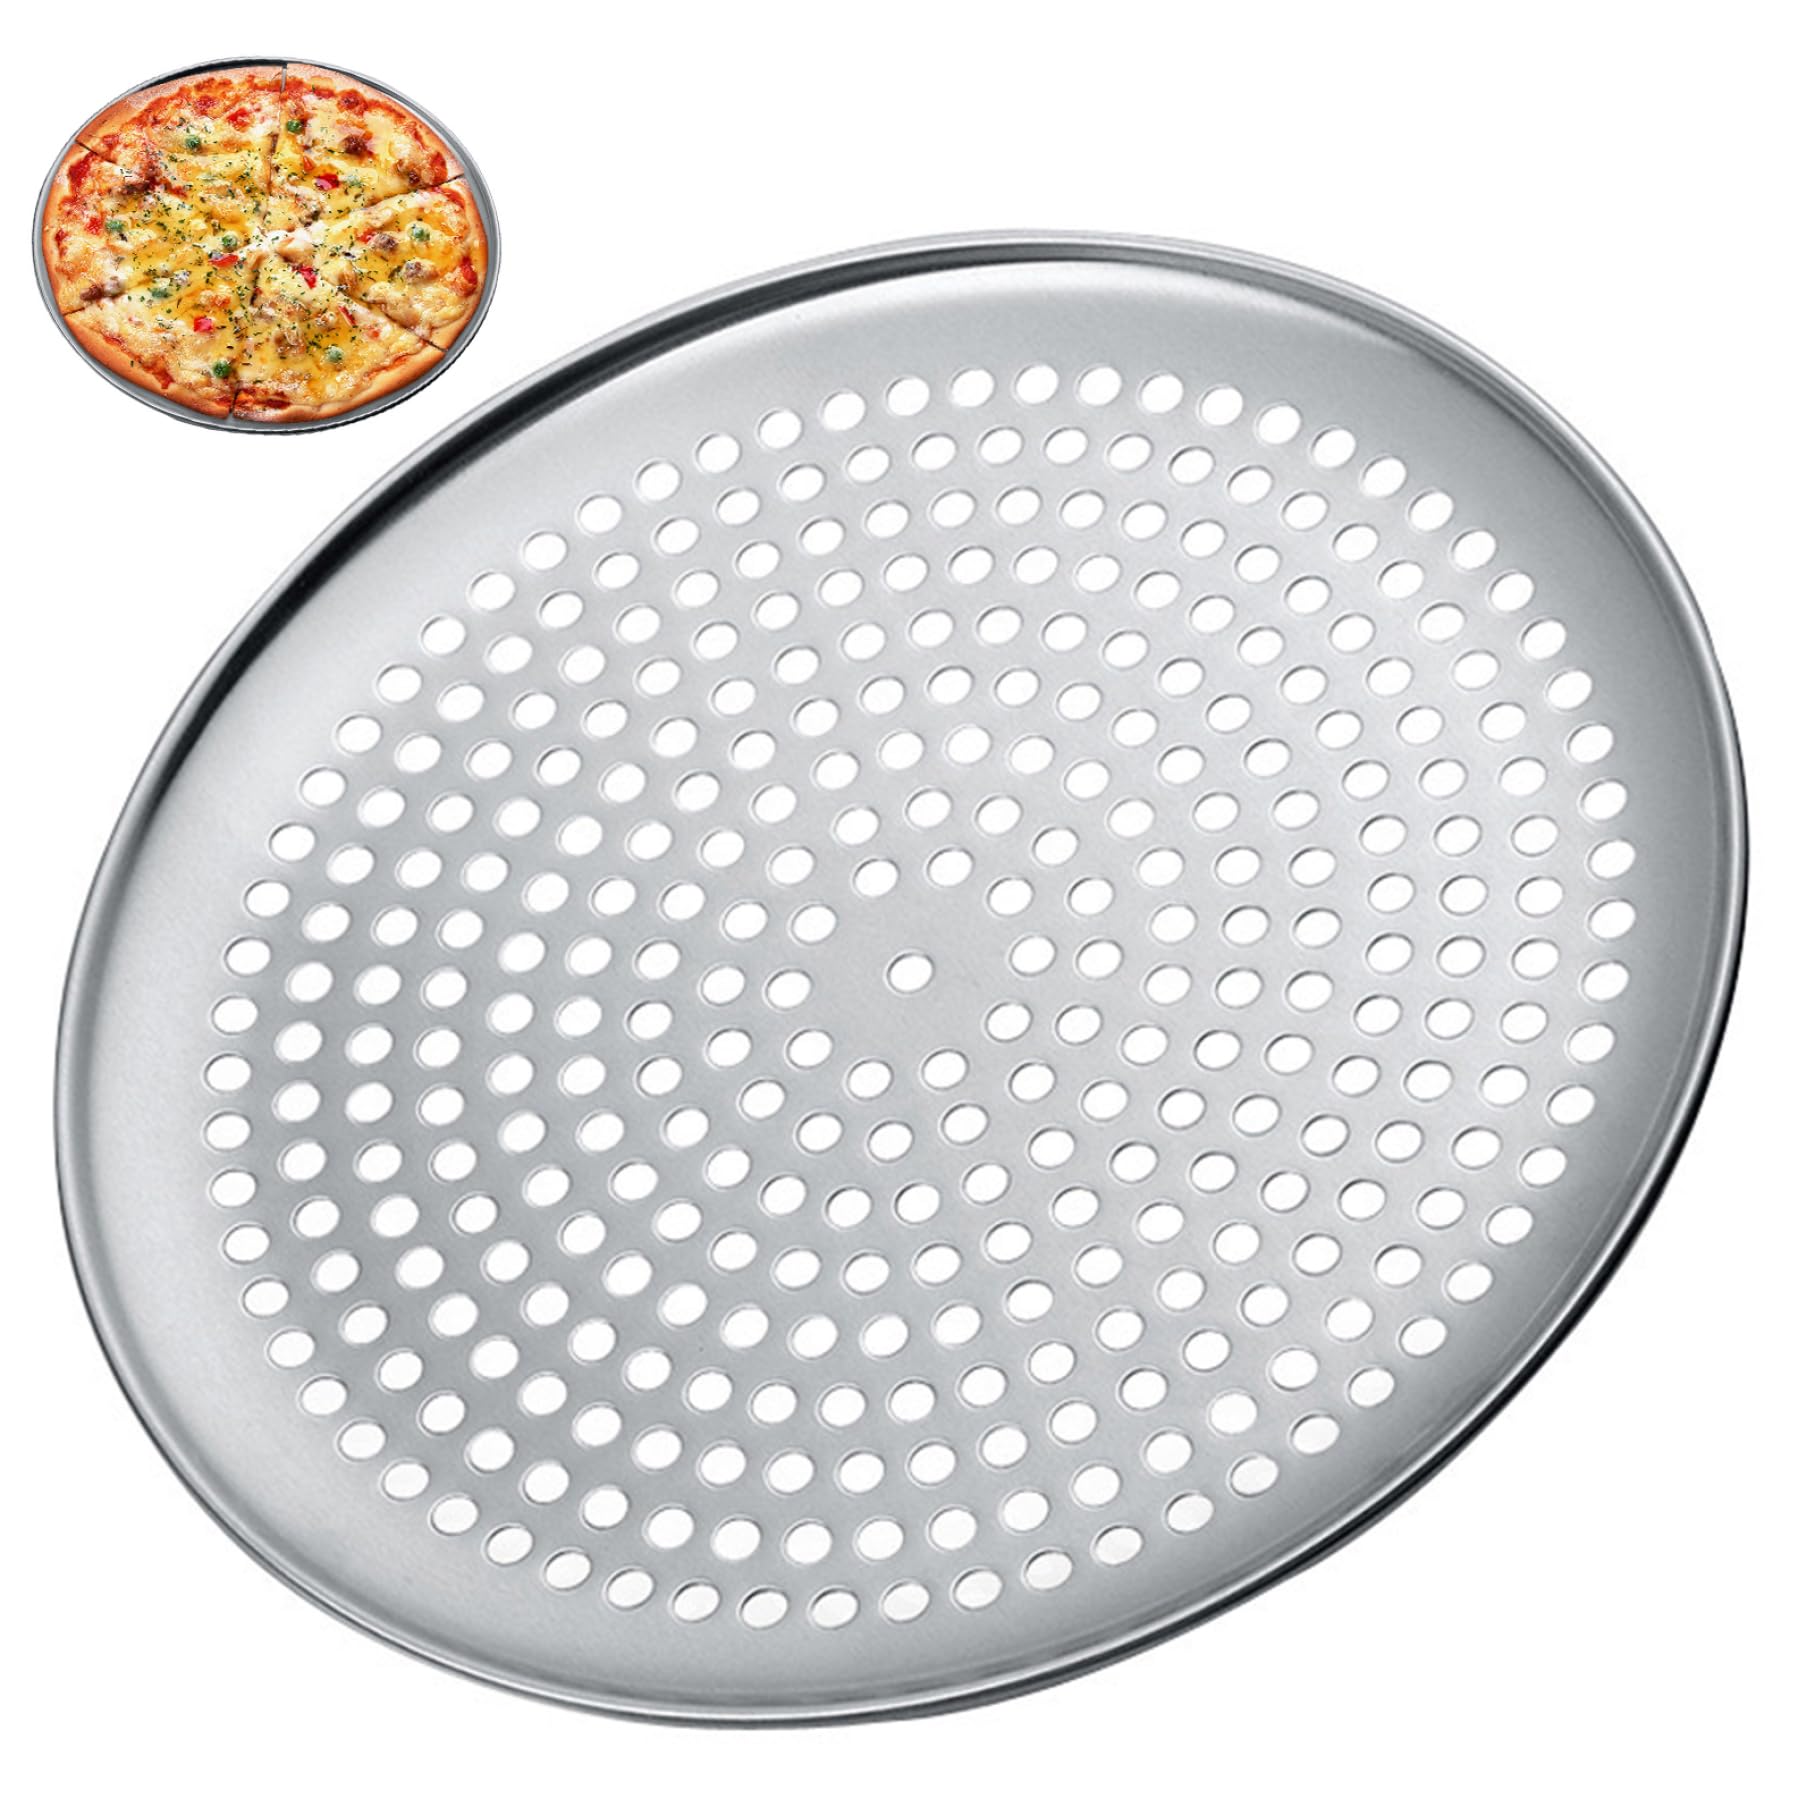 BUJIATANG Pizza Pan With Holes, Round Pizza Pan 16 Inch Nonstick Steel Pizza Pan Tray with Perforated Holes for Baking Pie Pizza Baking Supplies